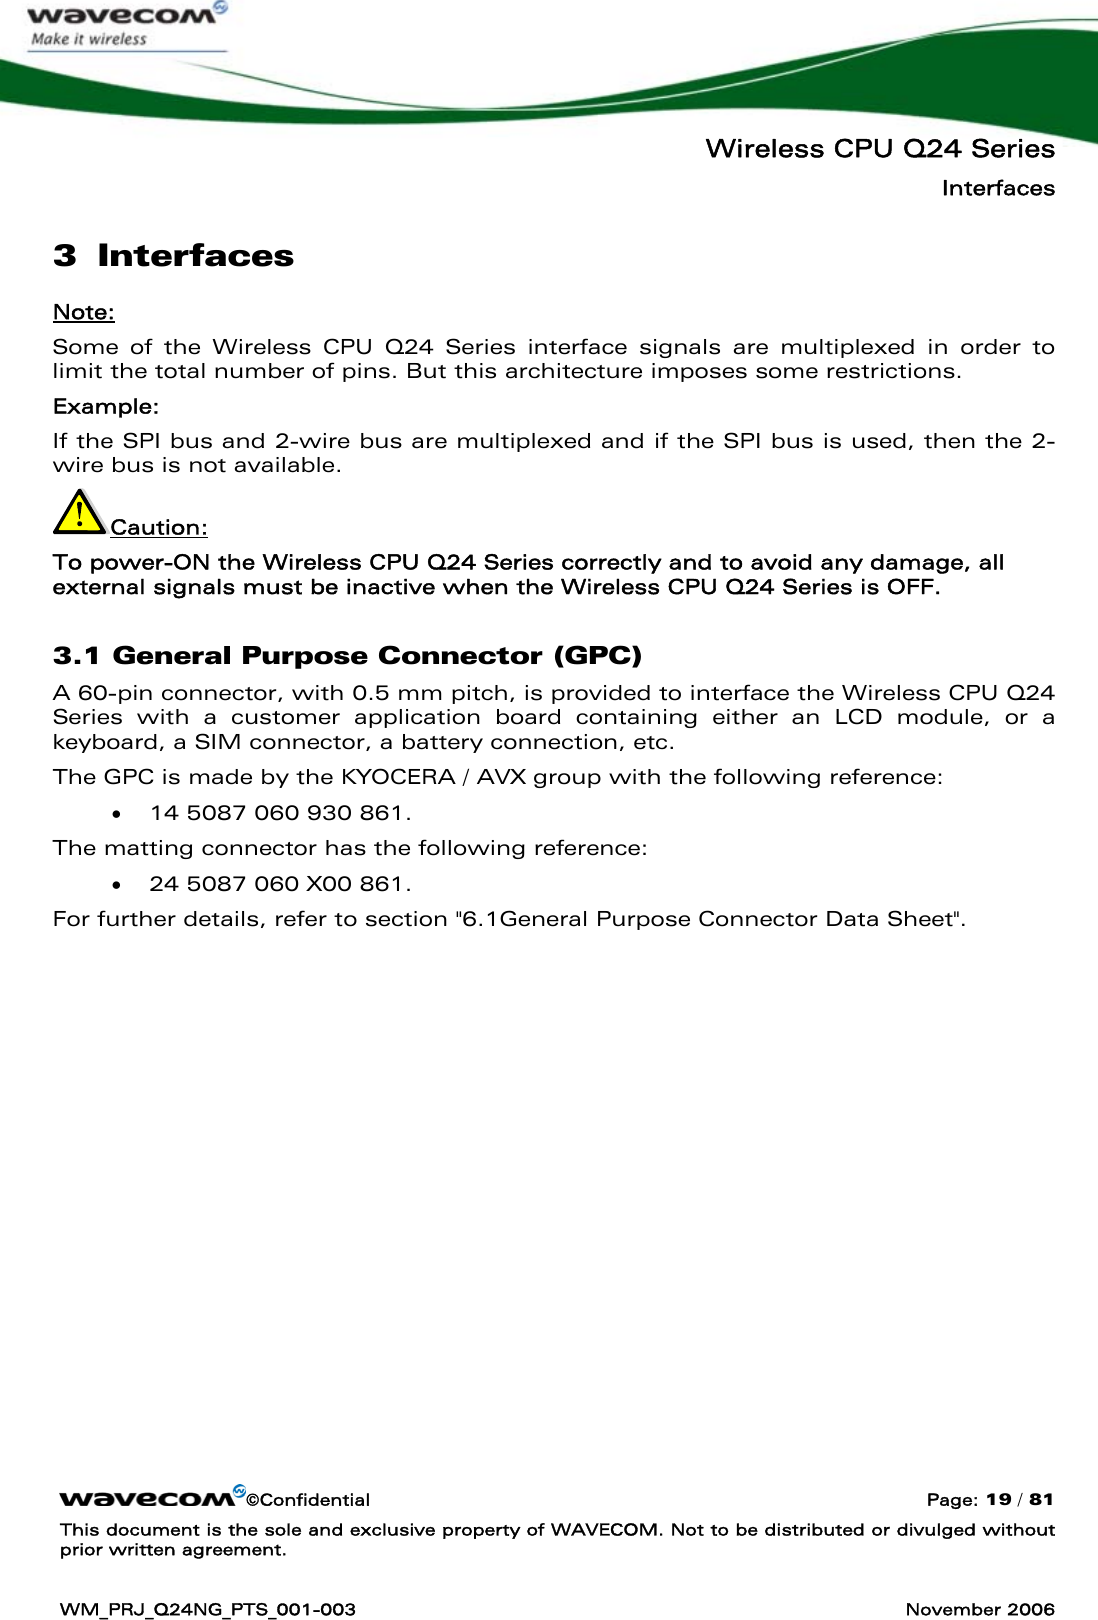   Wireless CPU Q24 Series Interfaces ©Confidential  Page: 19 / 81 This document is the sole and exclusive property of WAVECOM. Not to be distributed or divulged without prior written agreement.  WM_PRJ_Q24NG_PTS_001-003  November 2006  3 Interfaces Note: Some of the Wireless CPU Q24 Series interface signals are multiplexed in order to limit the total number of pins. But this architecture imposes some restrictions. Example:  If the SPI bus and 2-wire bus are multiplexed and if the SPI bus is used, then the 2-wire bus is not available. Caution: To power-ON the Wireless CPU Q24 Series correctly and to avoid any damage, all external signals must be inactive when the Wireless CPU Q24 Series is OFF.  3.1 General Purpose Connector (GPC) A 60-pin connector, with 0.5 mm pitch, is provided to interface the Wireless CPU Q24 Series with a customer application board containing either an LCD module, or a keyboard, a SIM connector, a battery connection, etc.  The GPC is made by the KYOCERA / AVX group with the following reference: • 14 5087 060 930 861. The matting connector has the following reference:  • 24 5087 060 X00 861. For further details, refer to section &quot;6.1General Purpose Connector Data Sheet&quot;. 